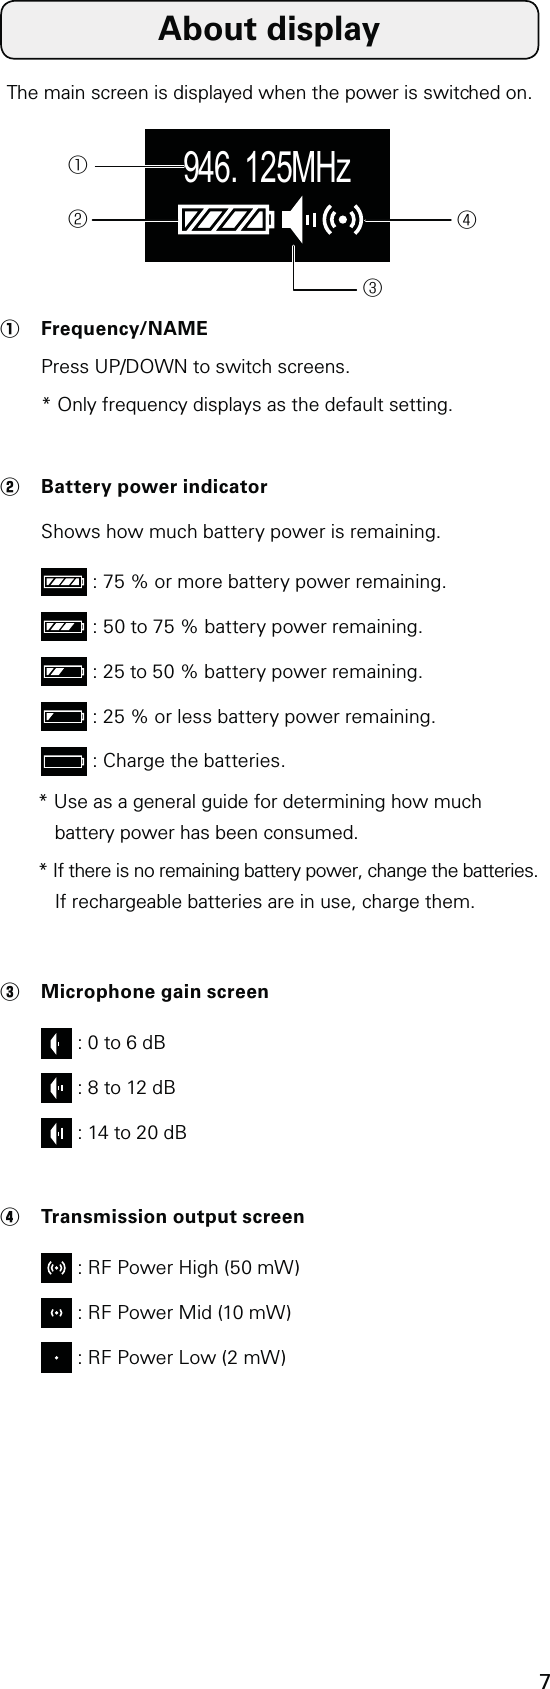 7The main screen is displayed when the power is switched on. 946. 125MHz①②③④①  Frequency/NAME Press UP/DOWN to switch screens.  * Only frequency displays as the default setting.②  Battery power indicator Shows how much battery power is remaining.  : 75 % or more battery power remaining.  : 50 to 75 % battery power remaining.  : 25 to 50 % battery power remaining.  : 25 % or less battery power remaining.  : Charge the batteries.* Use as a general guide for determining how much battery power has been consumed.* If there is no remaining battery power, change the batteries. If rechargeable batteries are in use, charge them.③  Microphone gain screen  : 0 to 6 dB  : 8 to 12 dB  : 14 to 20 dB④  Transmission output screen  : RF Power High (50 mW)  : RF Power Mid (10 mW)  : RF Power Low (2 mW)About display